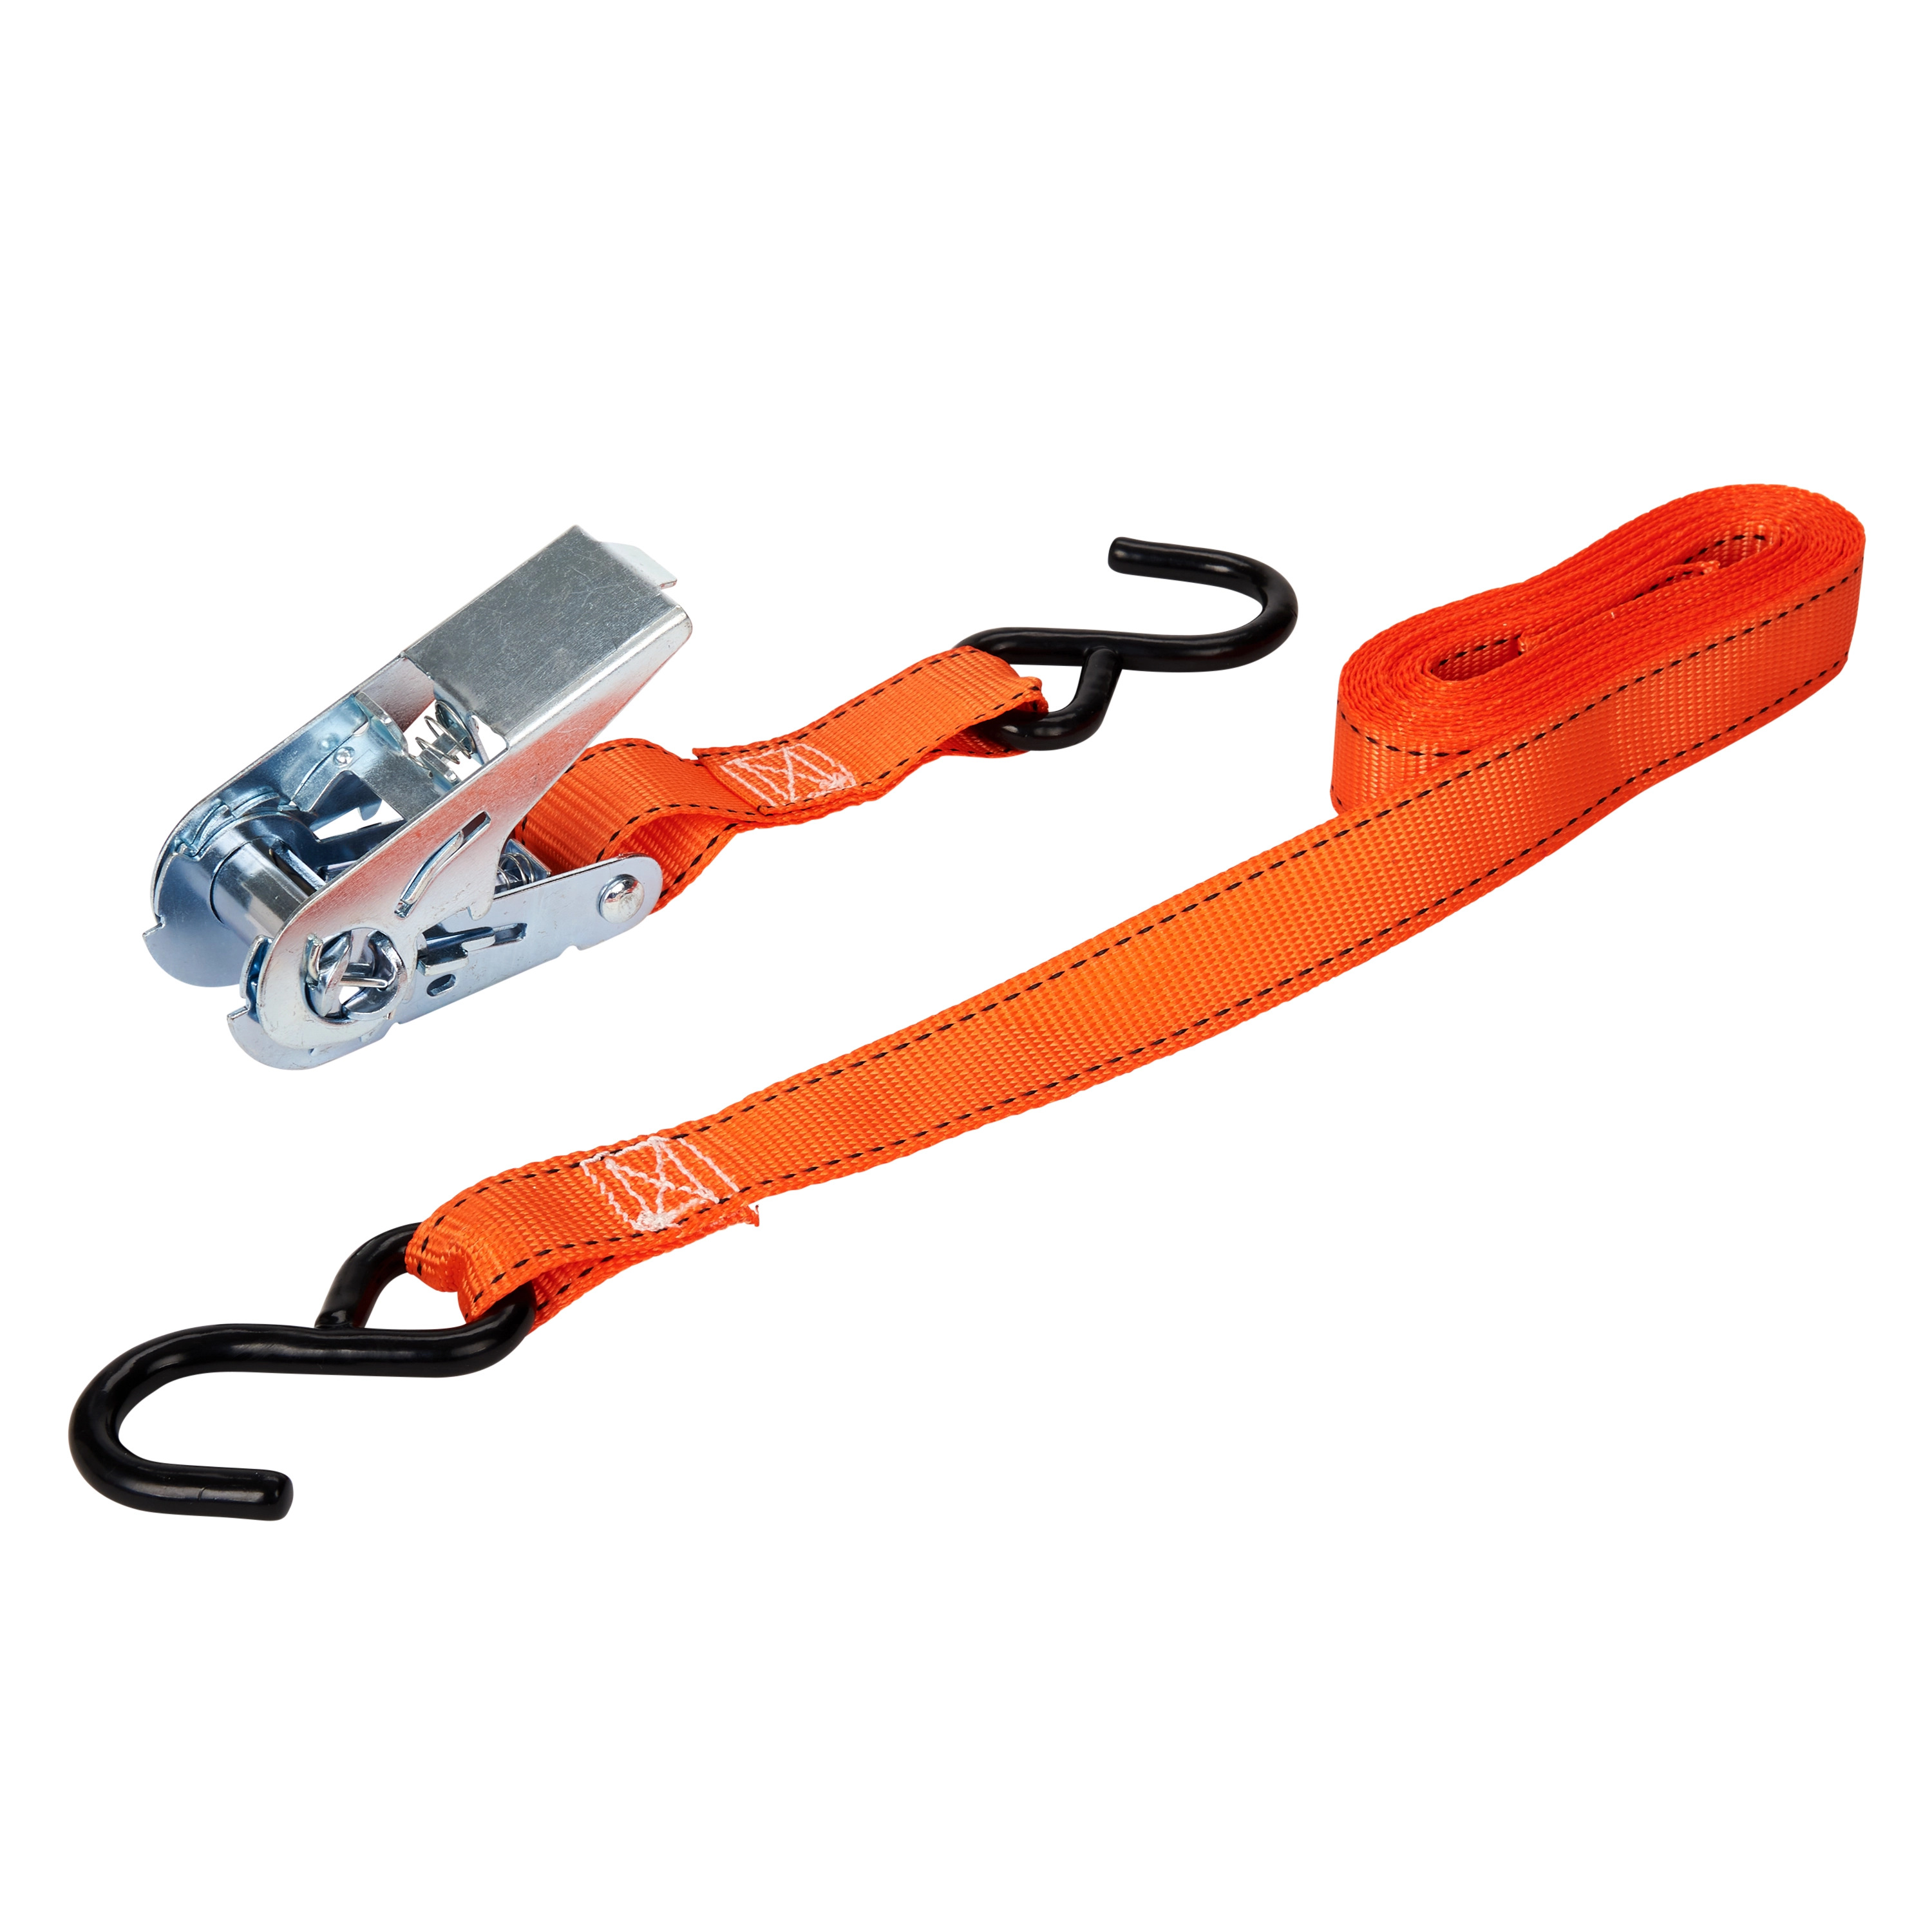 1" x 10' High Tension Ratchet Tie-Down, S-Hooks variant image view